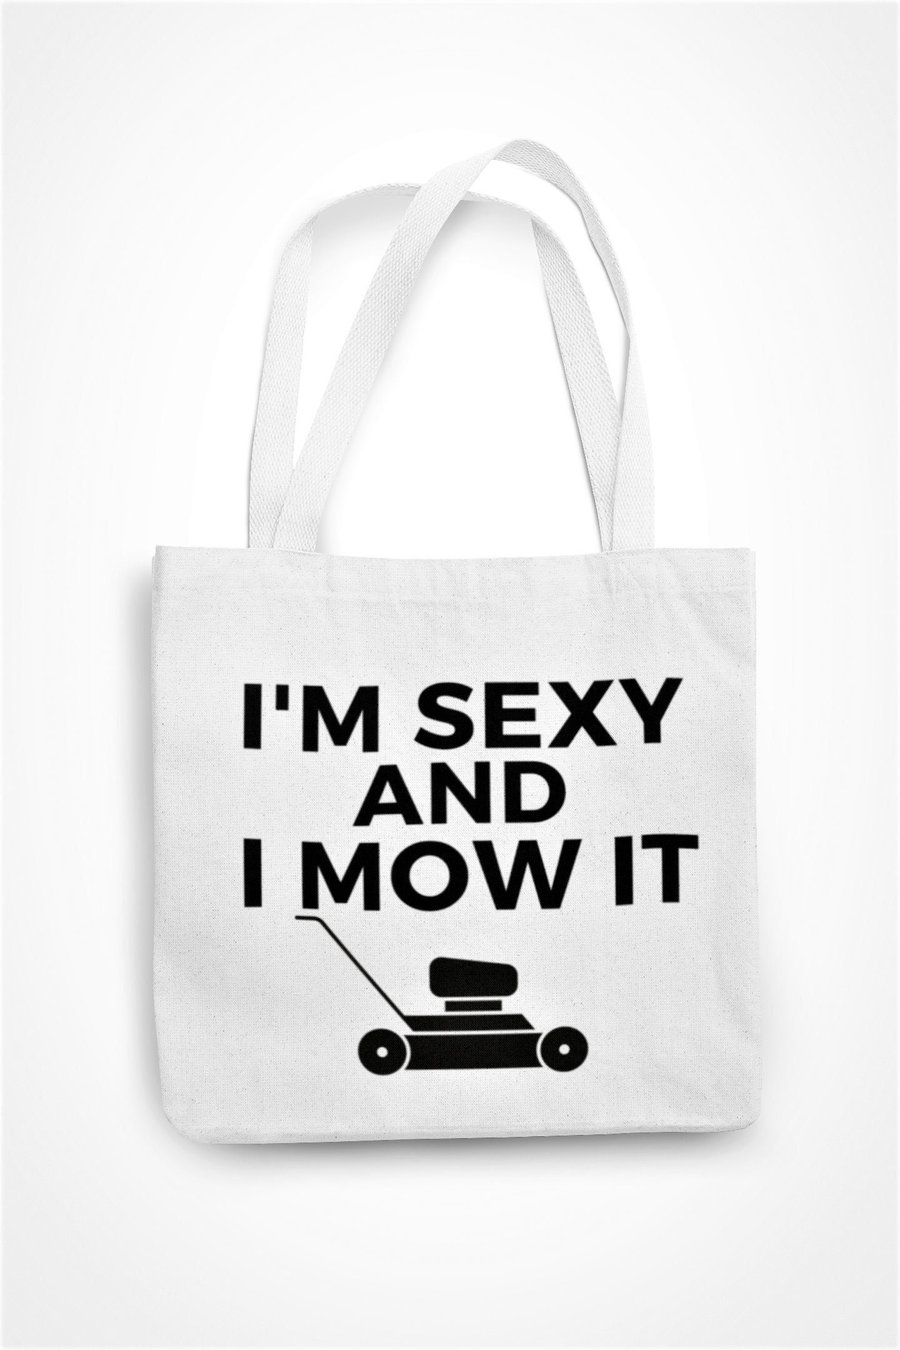 I'm Sexy And I Mow It Tote Bag Funny Gardener Husband Wife Novelty Bag Adult 